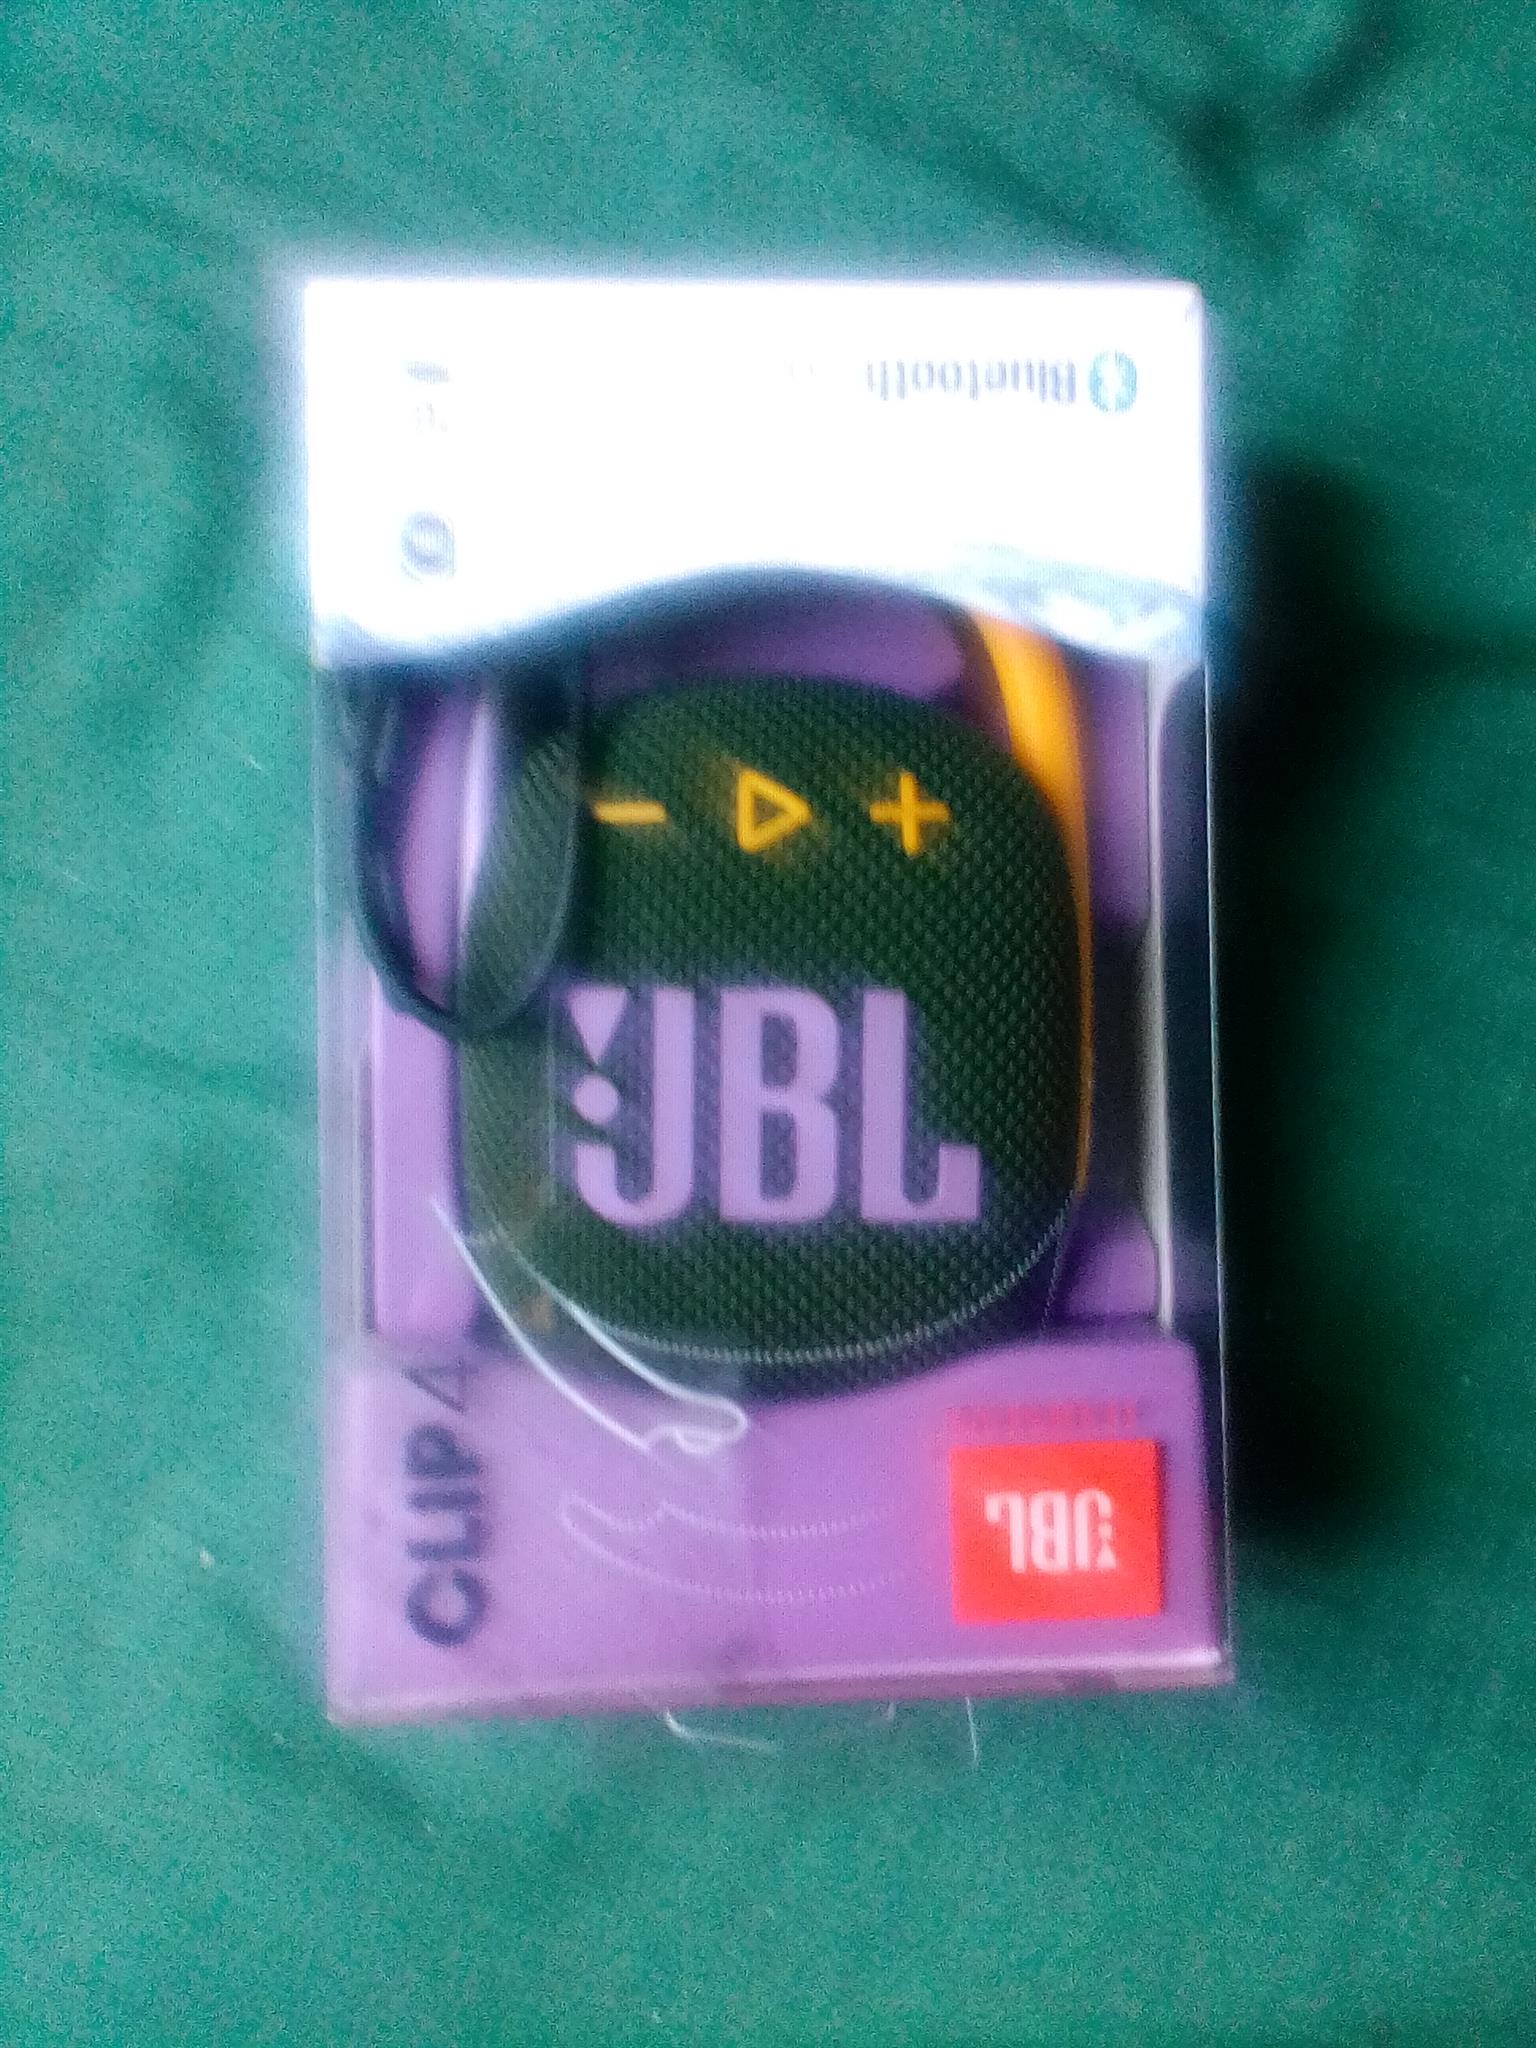 JBL clip 4 Bluetooth speaker for sale..brand newcon..price..1100..asking for 600